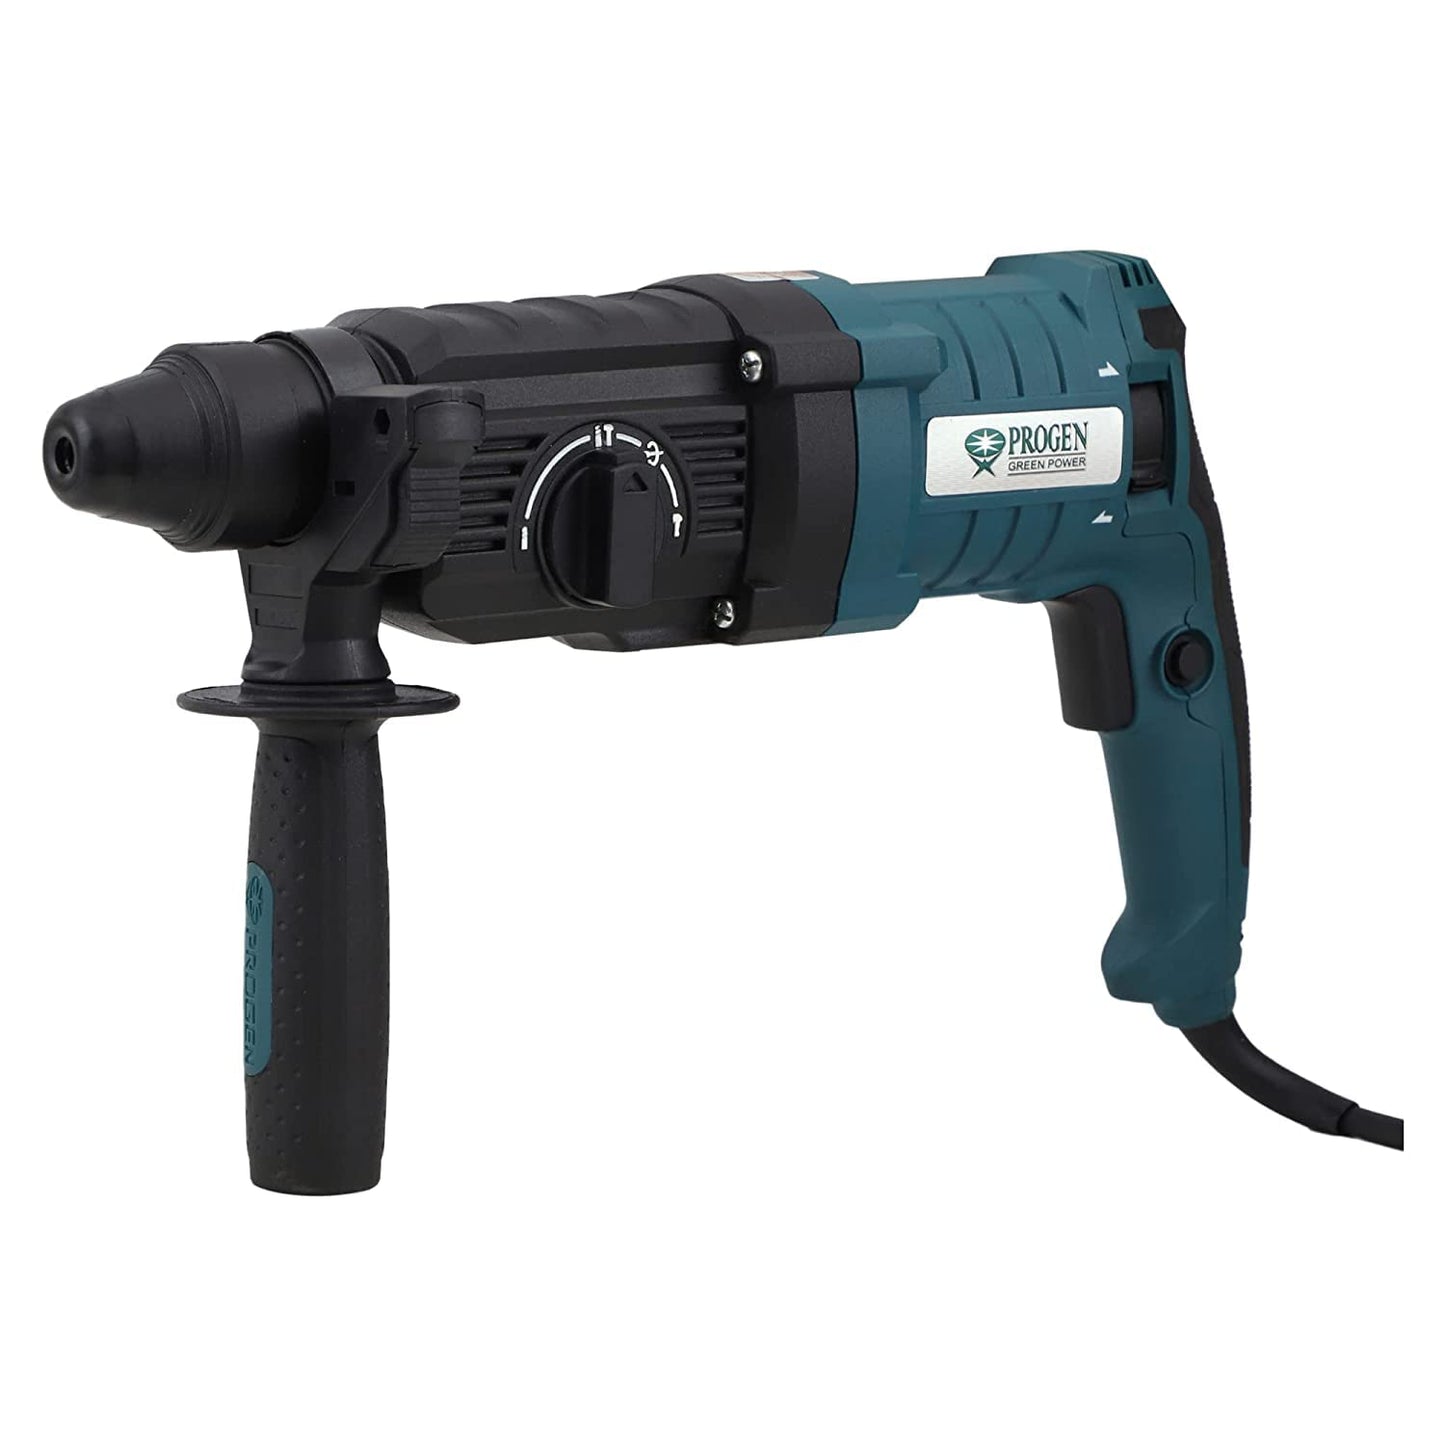 PROGEN 9220-HG 780W 20mm Rotary Hammer Drill Machine, SDS Plus Shank, Variable Speed, Reversible 4 Functions with 3 Bits For Hammering & Drilling on Concrete, Masonry & Wood (3900 bpm, 2000 Rpm)